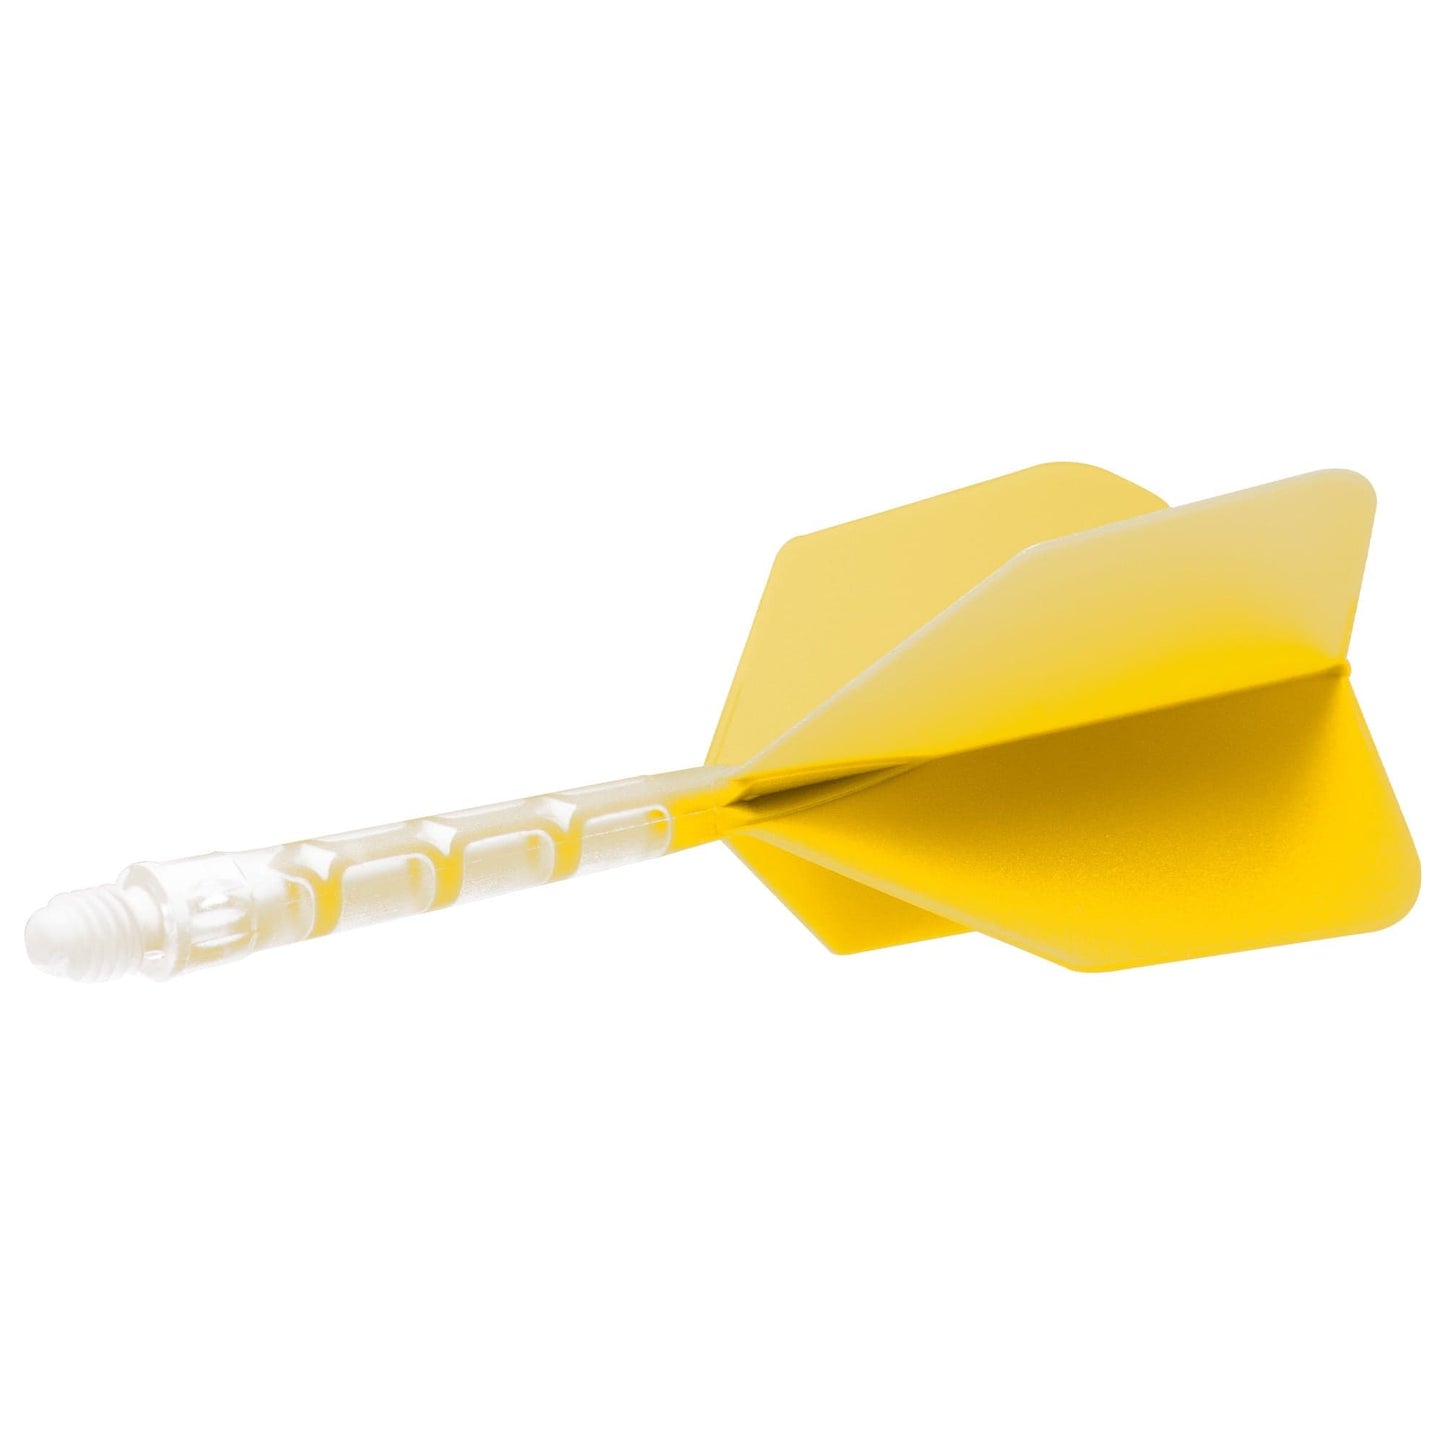 Cuesoul Rost T19 Integrated Dart Shaft and Flights - Big Wing - Clear with Yellow Flight